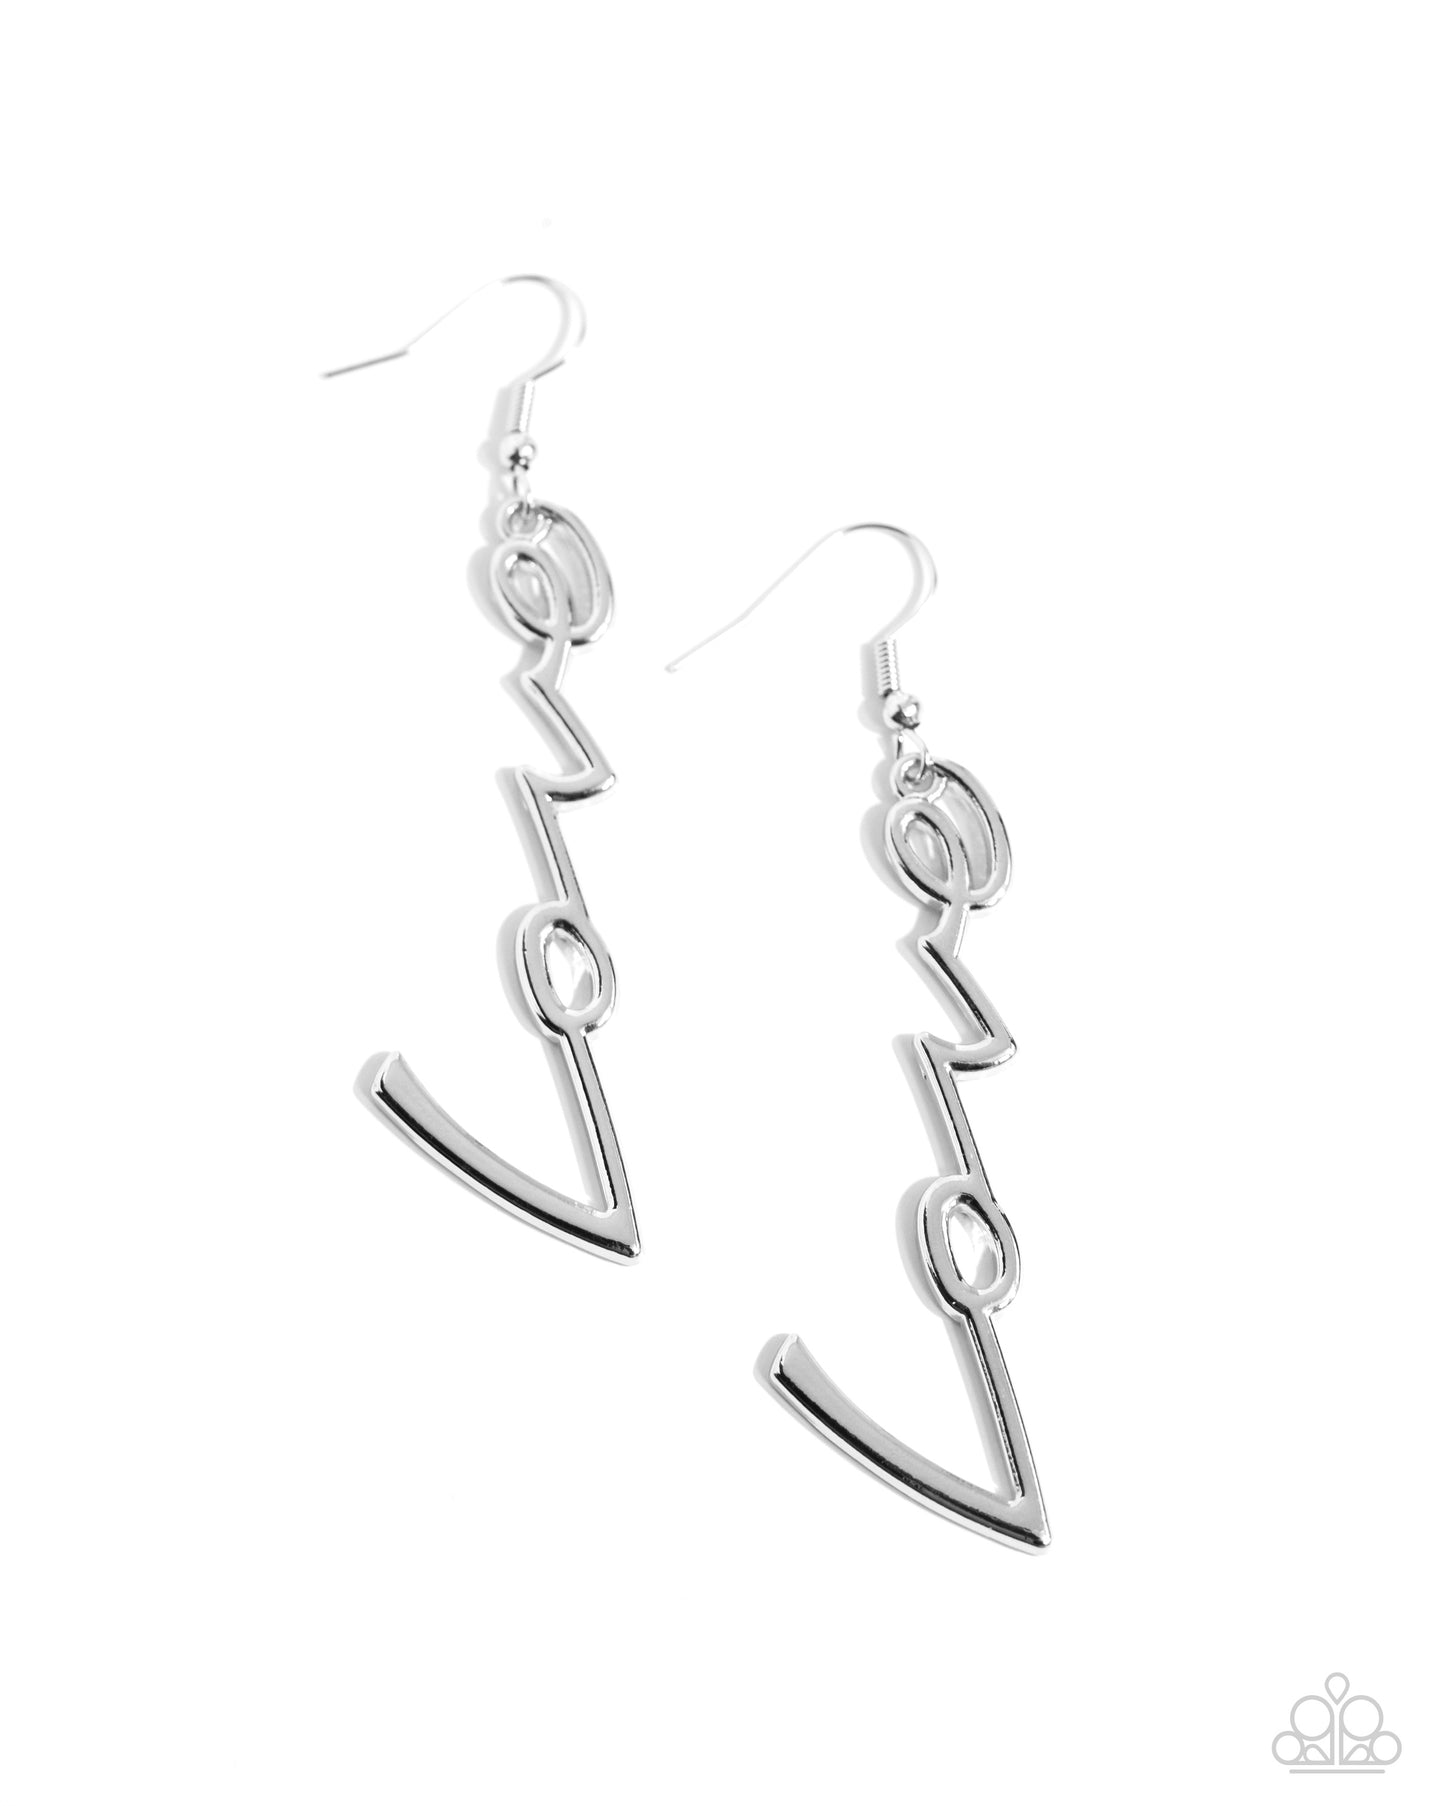 Paparazzi Light-Catching Letters - Silver Earrings